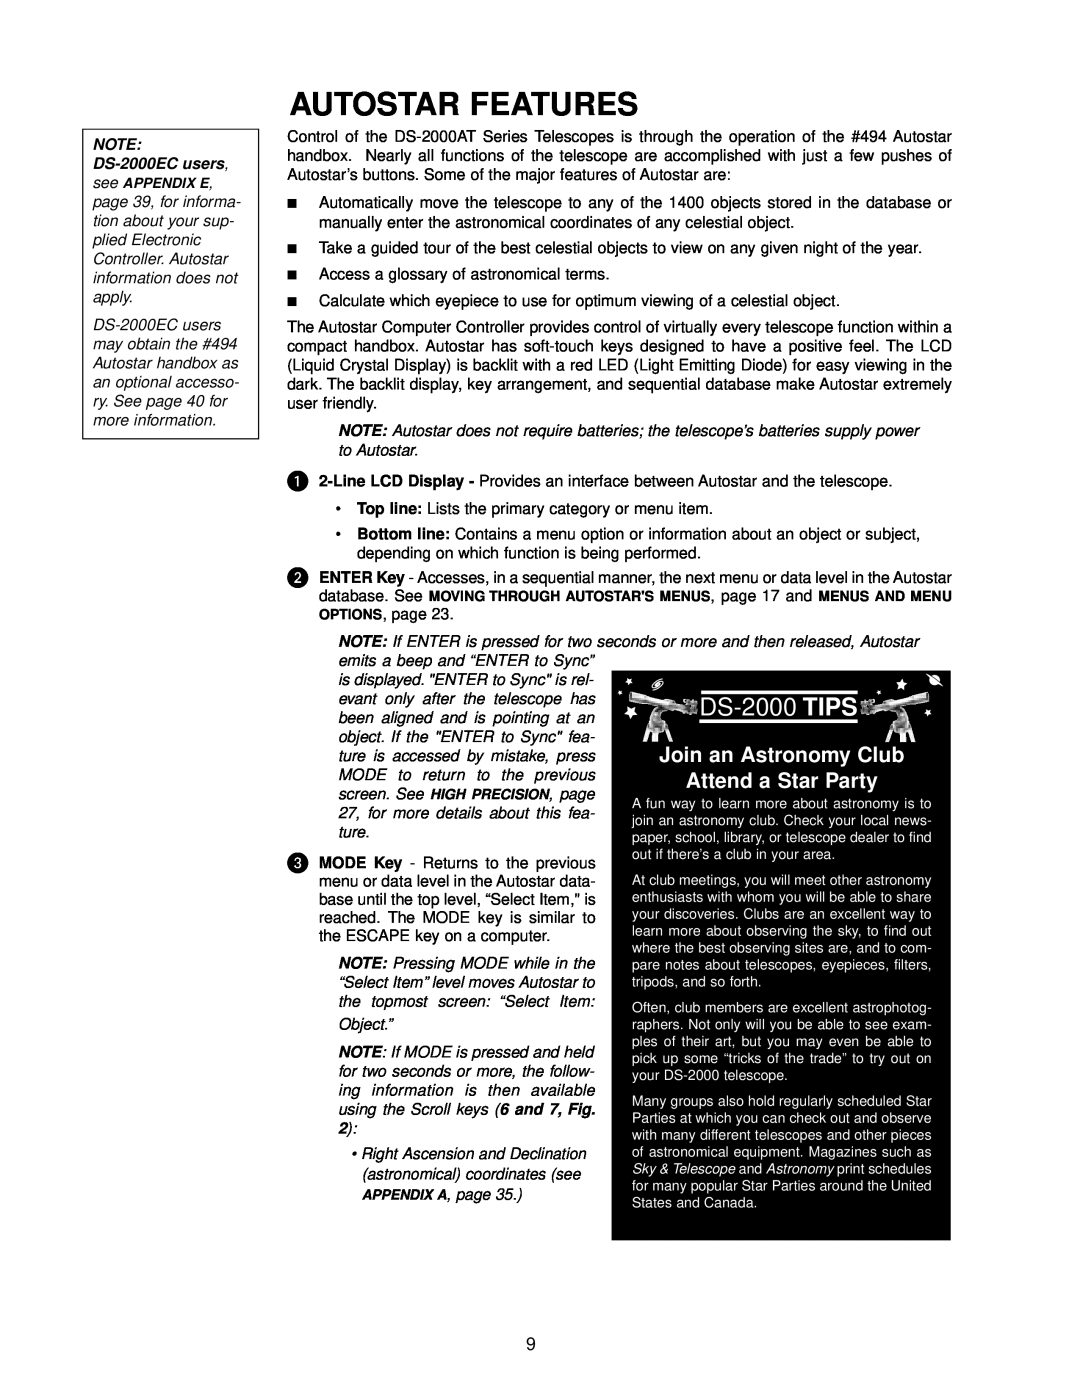 Meade instruction manual Autostar Features, DS-2000 TIPS, Join an Astronomy Club, Attend a Star Party 